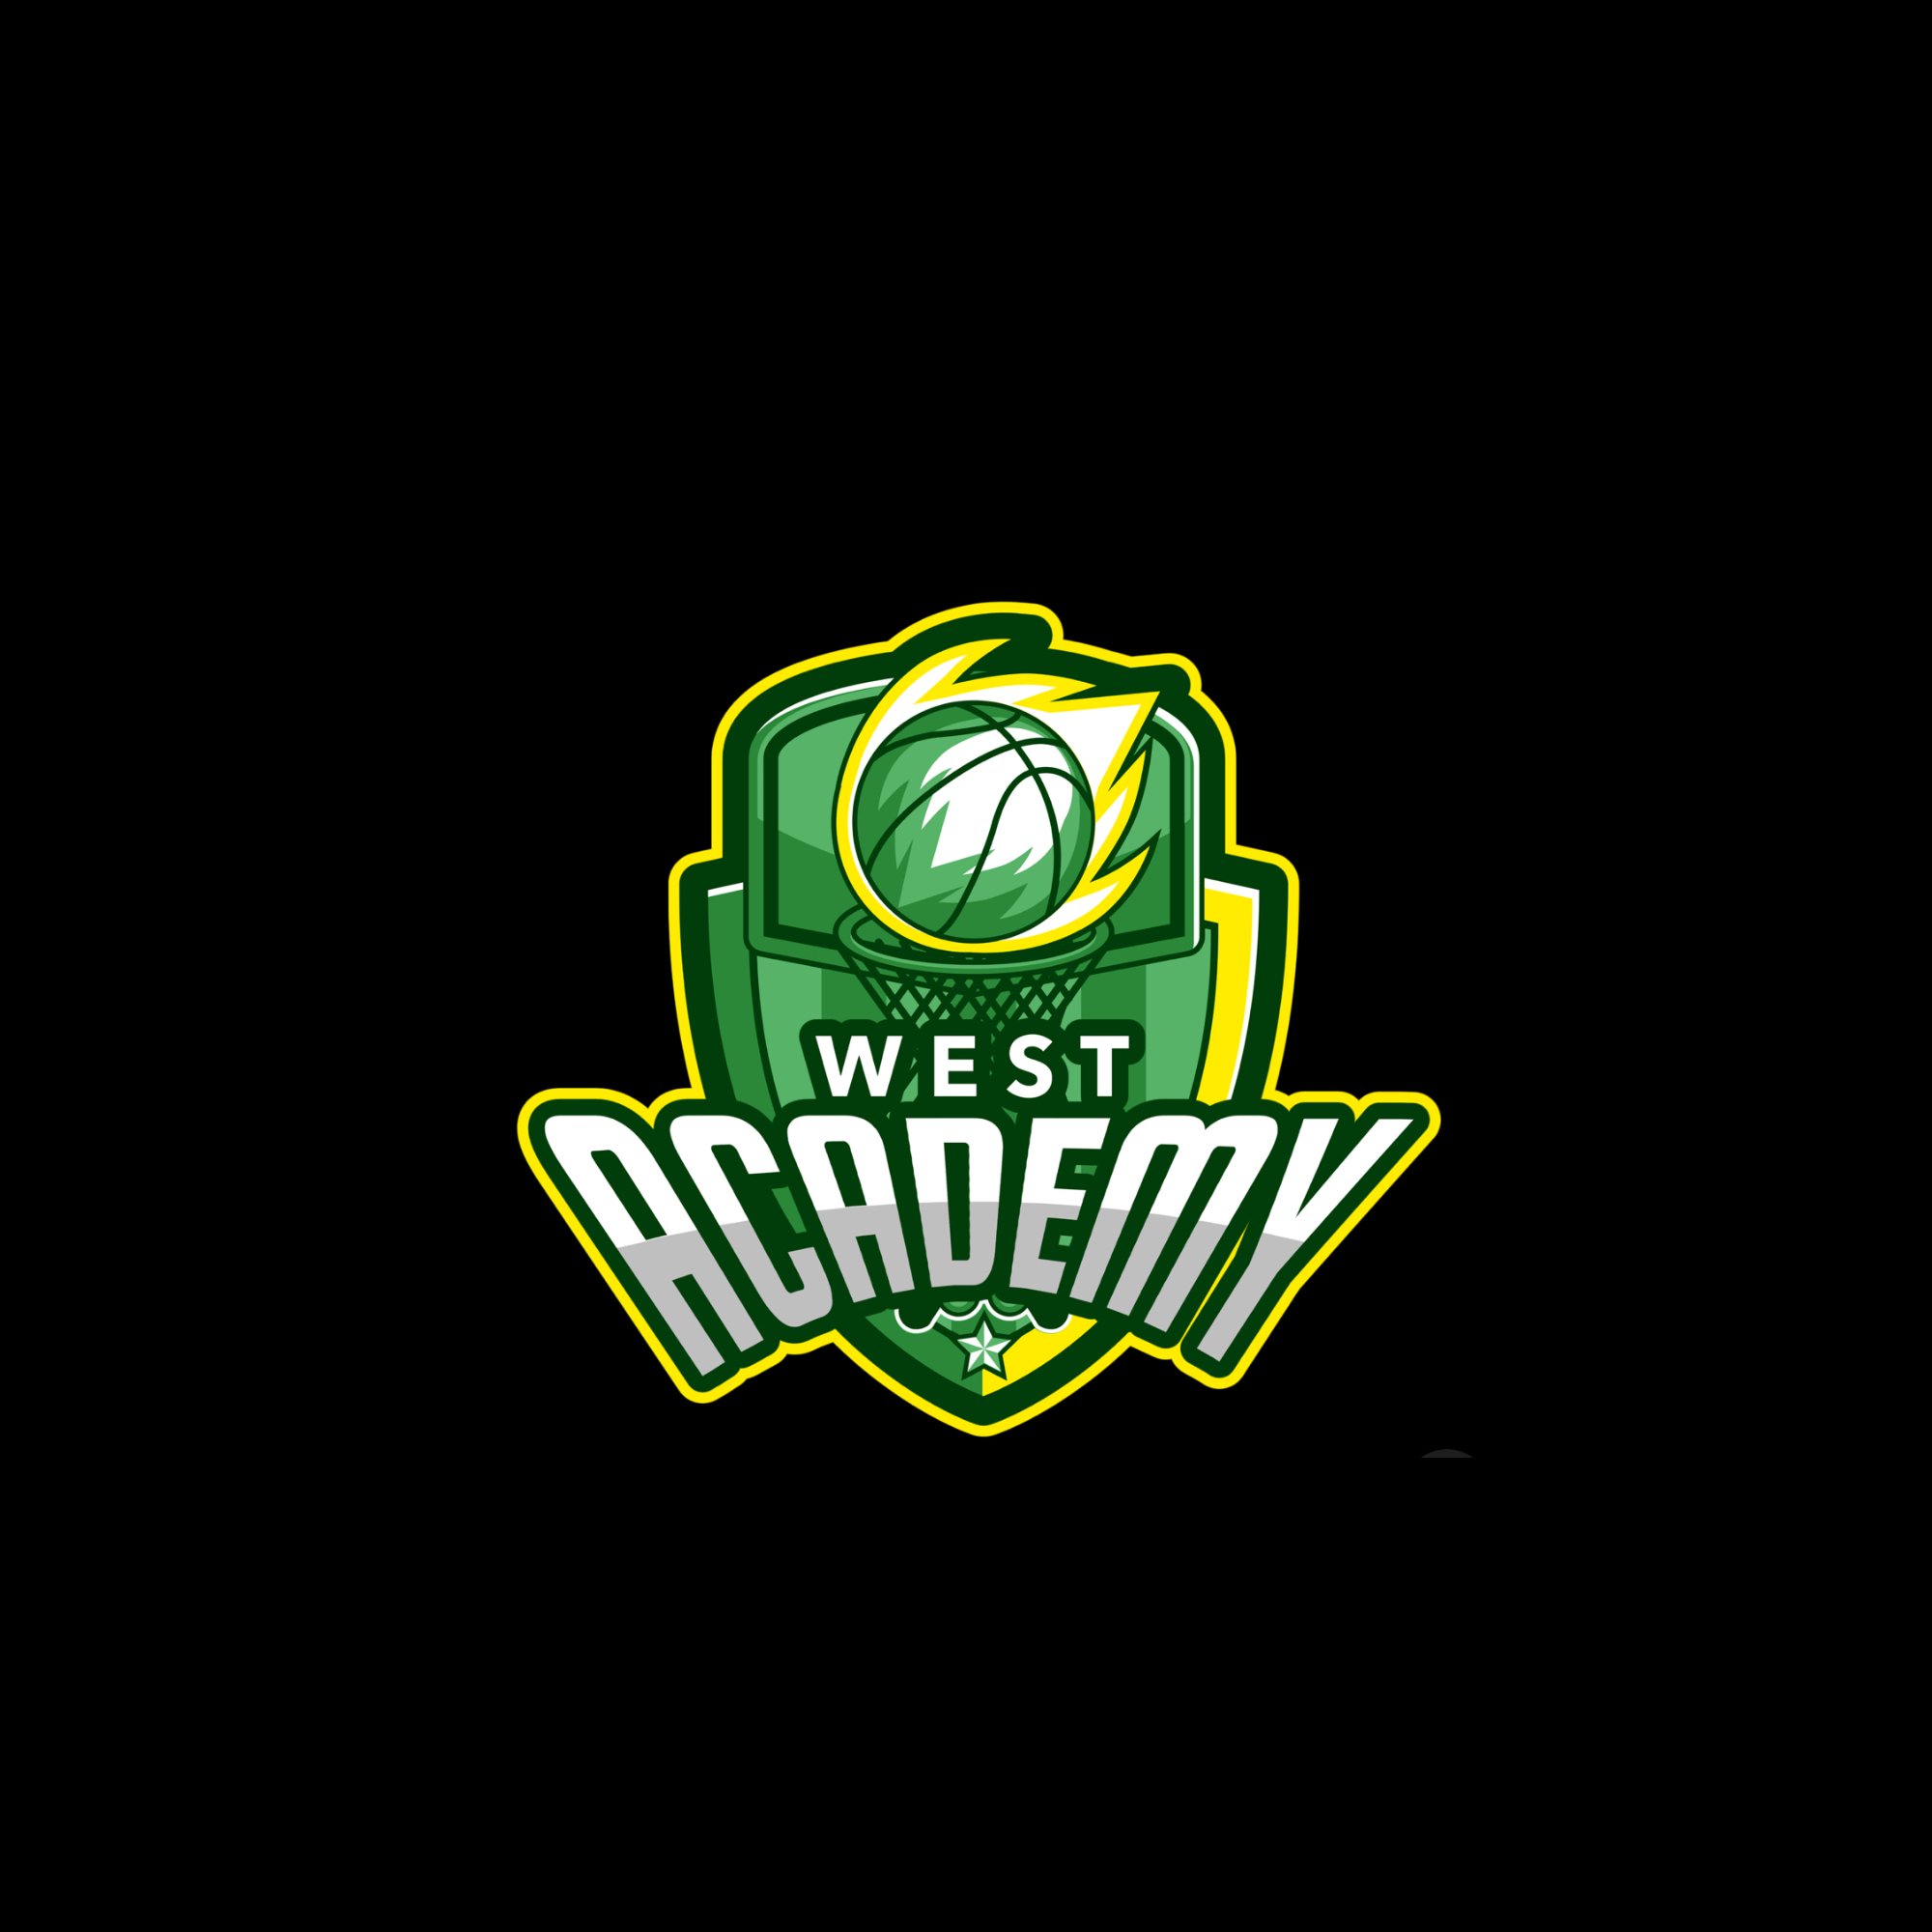 The official logo of West Academy